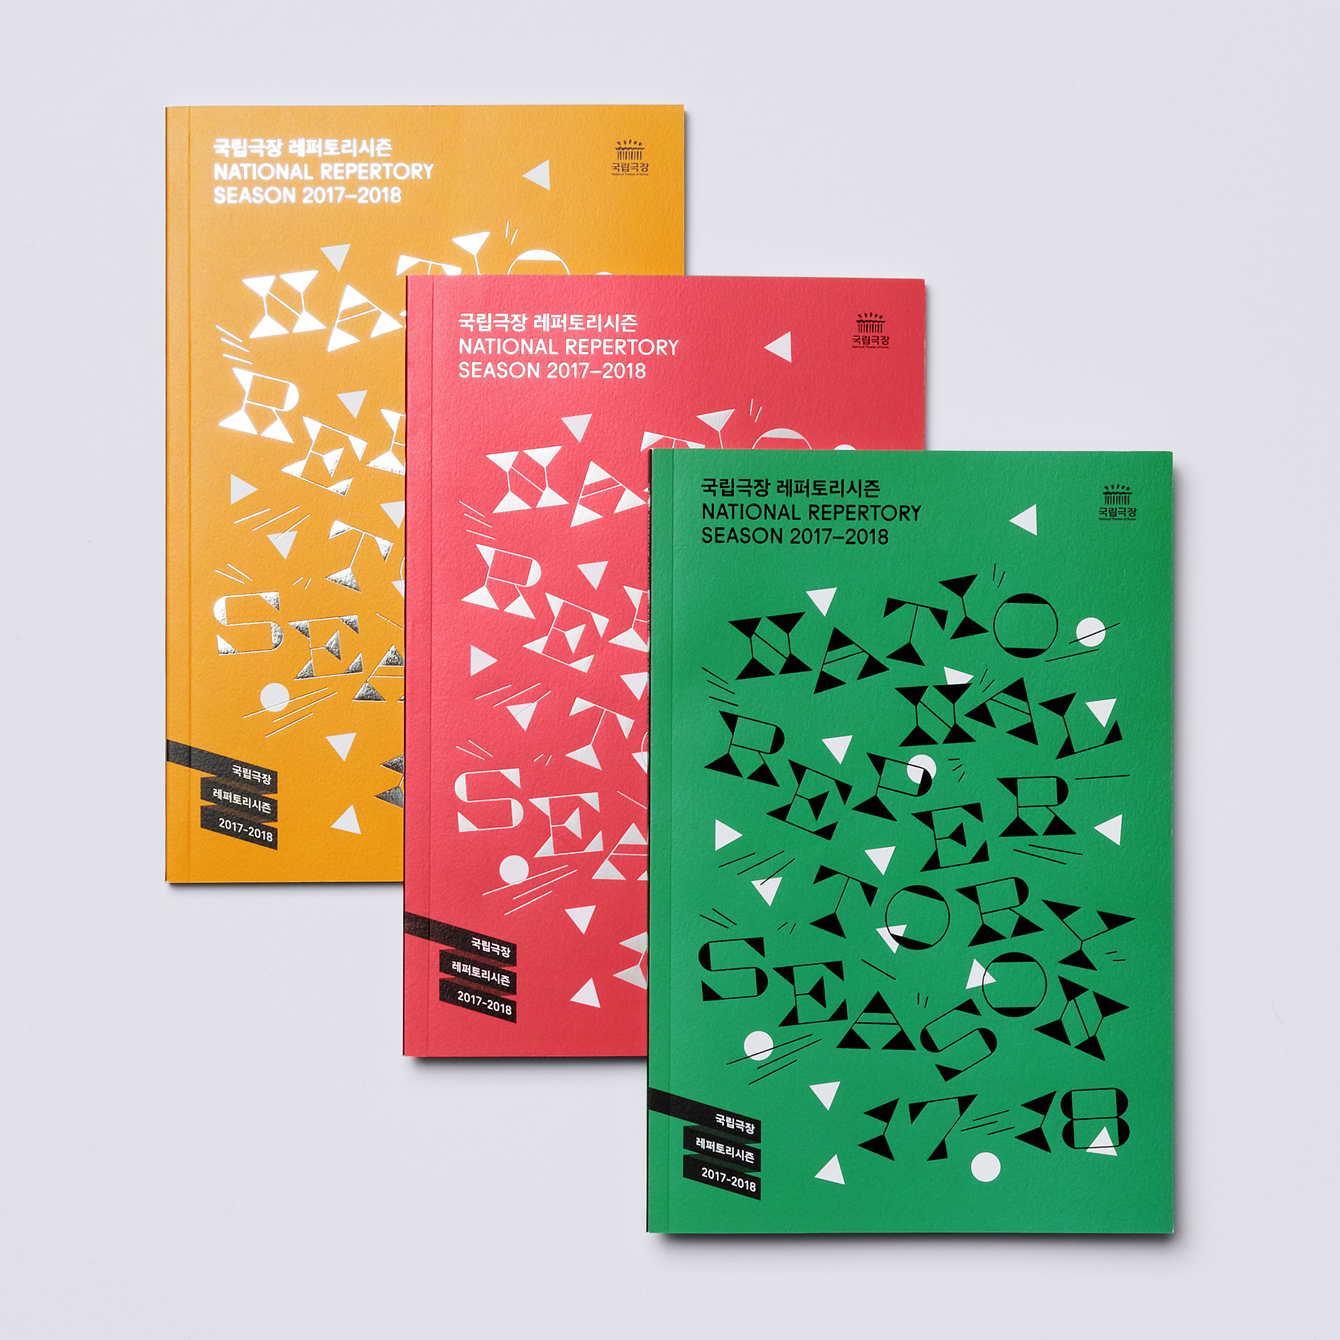 Campaign identity and programs by Studio fnt for the 2017–18 season at the National Theatre of Korea